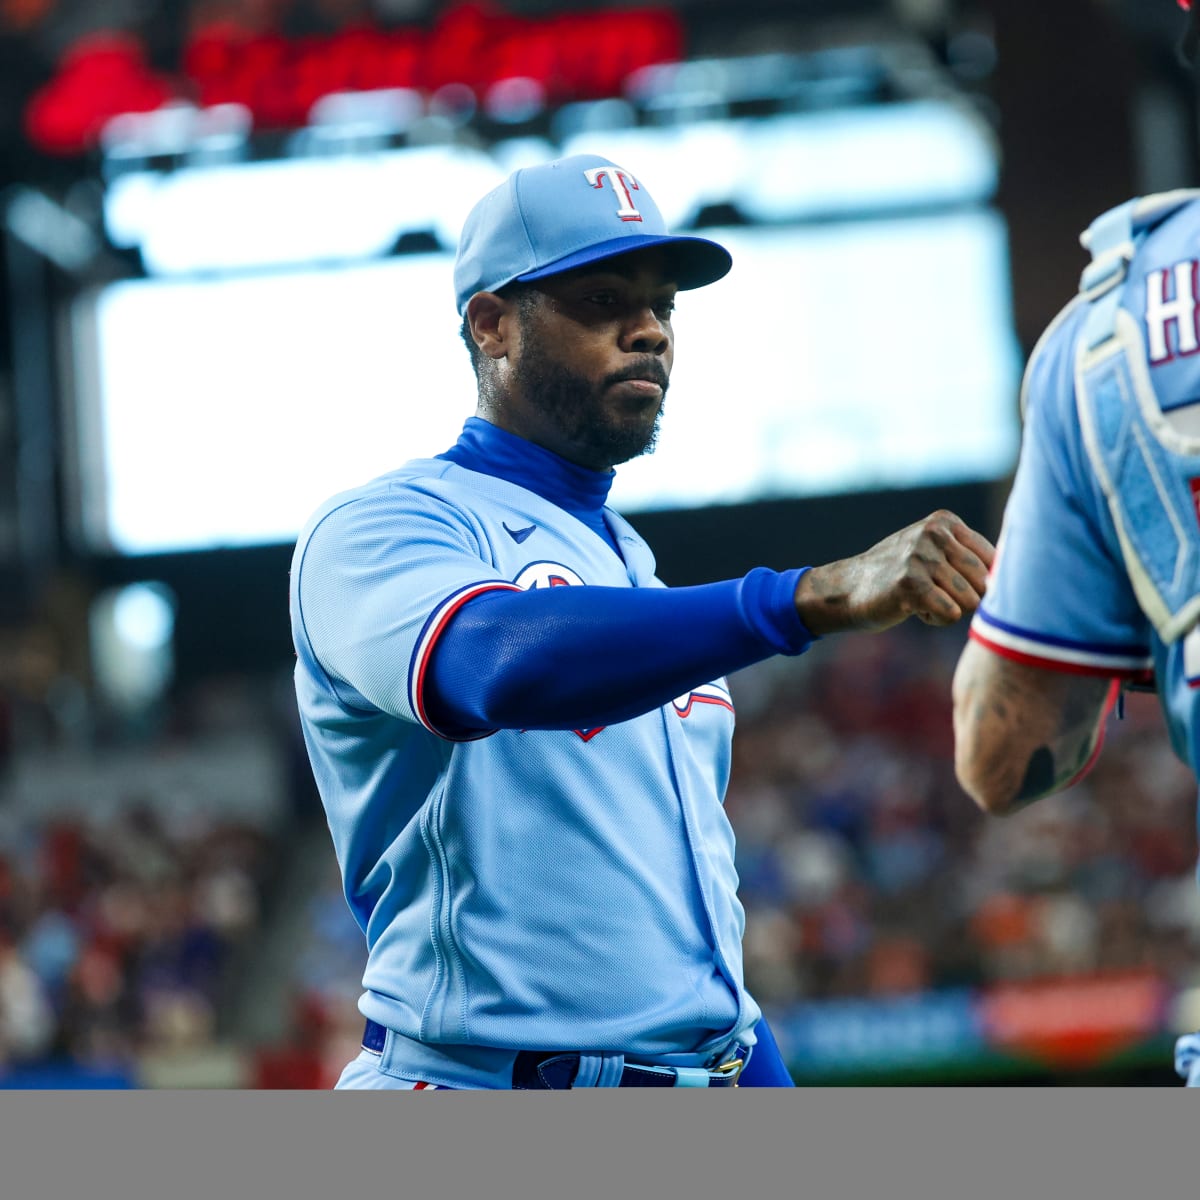 New Reliever Aroldis Chapman Brings Heat In Texas Rangers Debut - Sports  Illustrated Texas Rangers News, Analysis and More